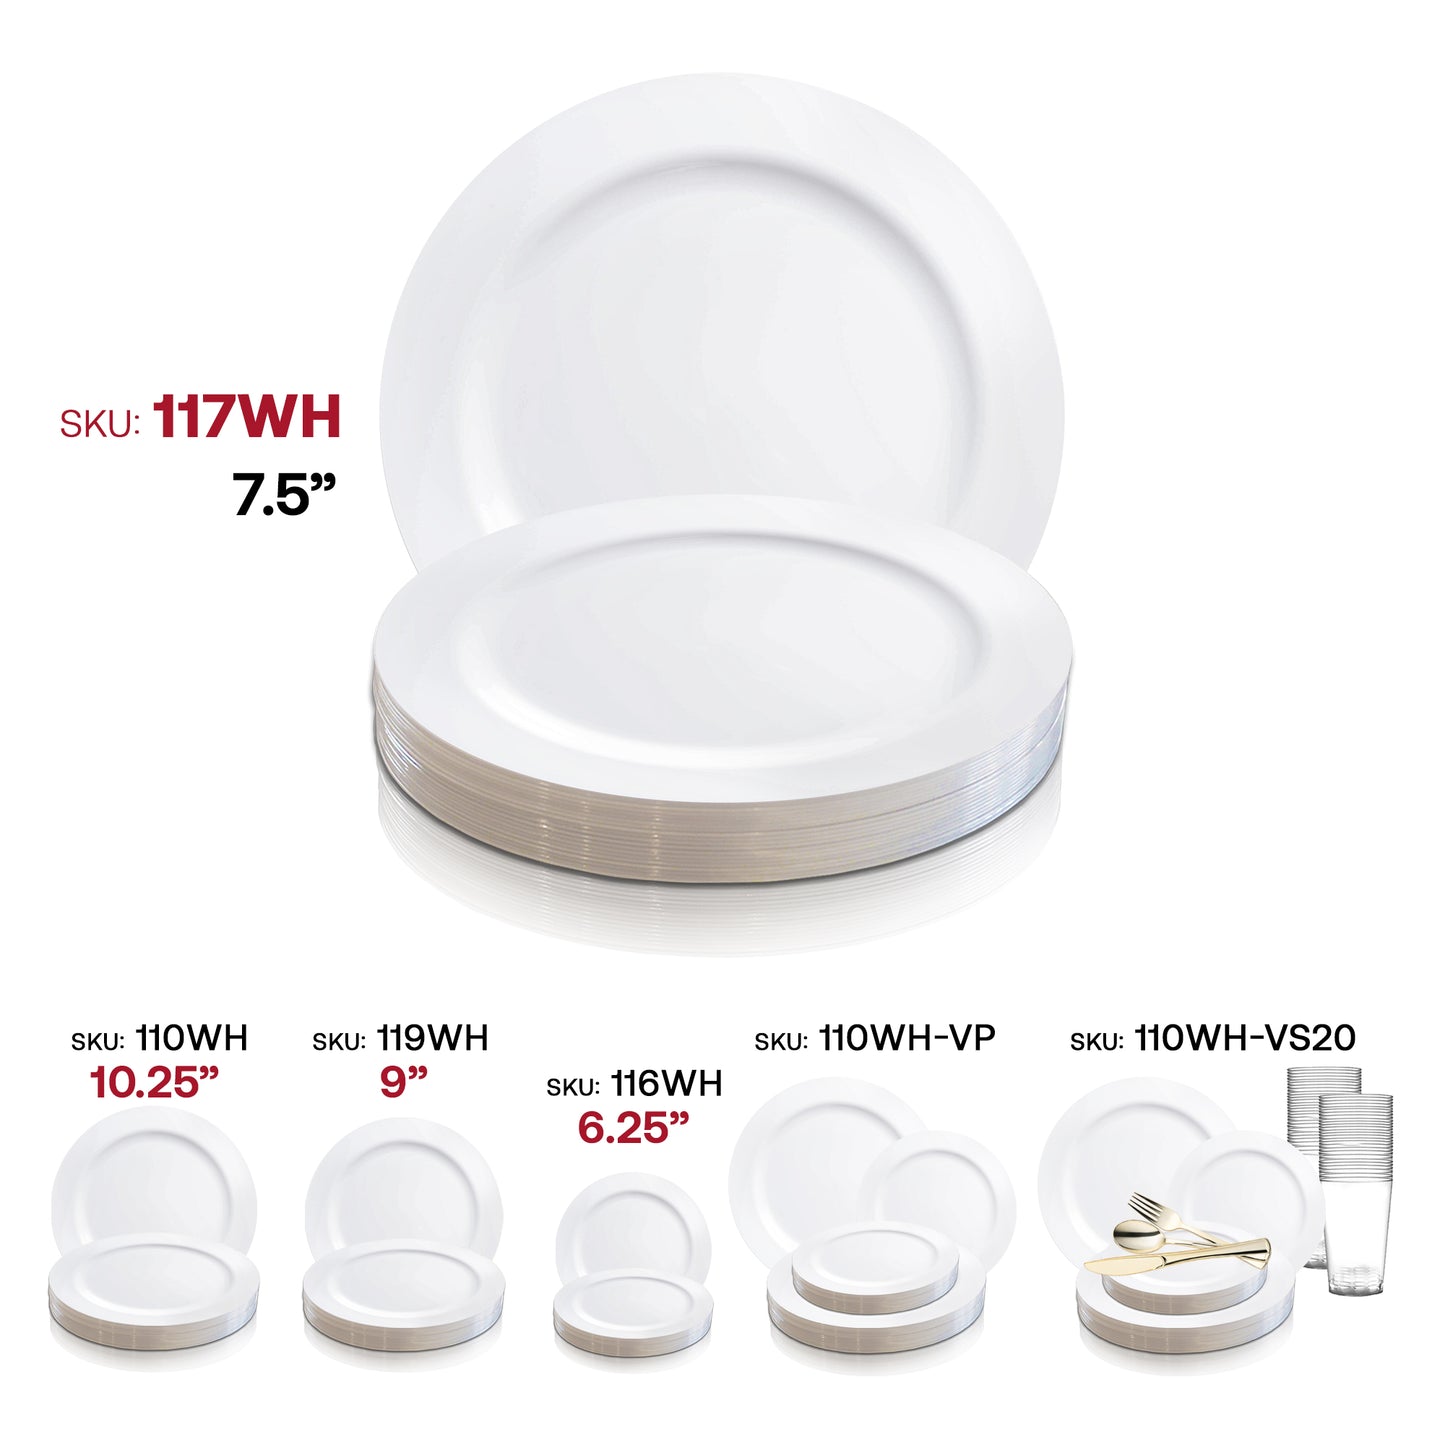 Solid White Economy Round Disposable Plastic Appetizer/Salad Plates (7.5") SKU | The Kaya Collection